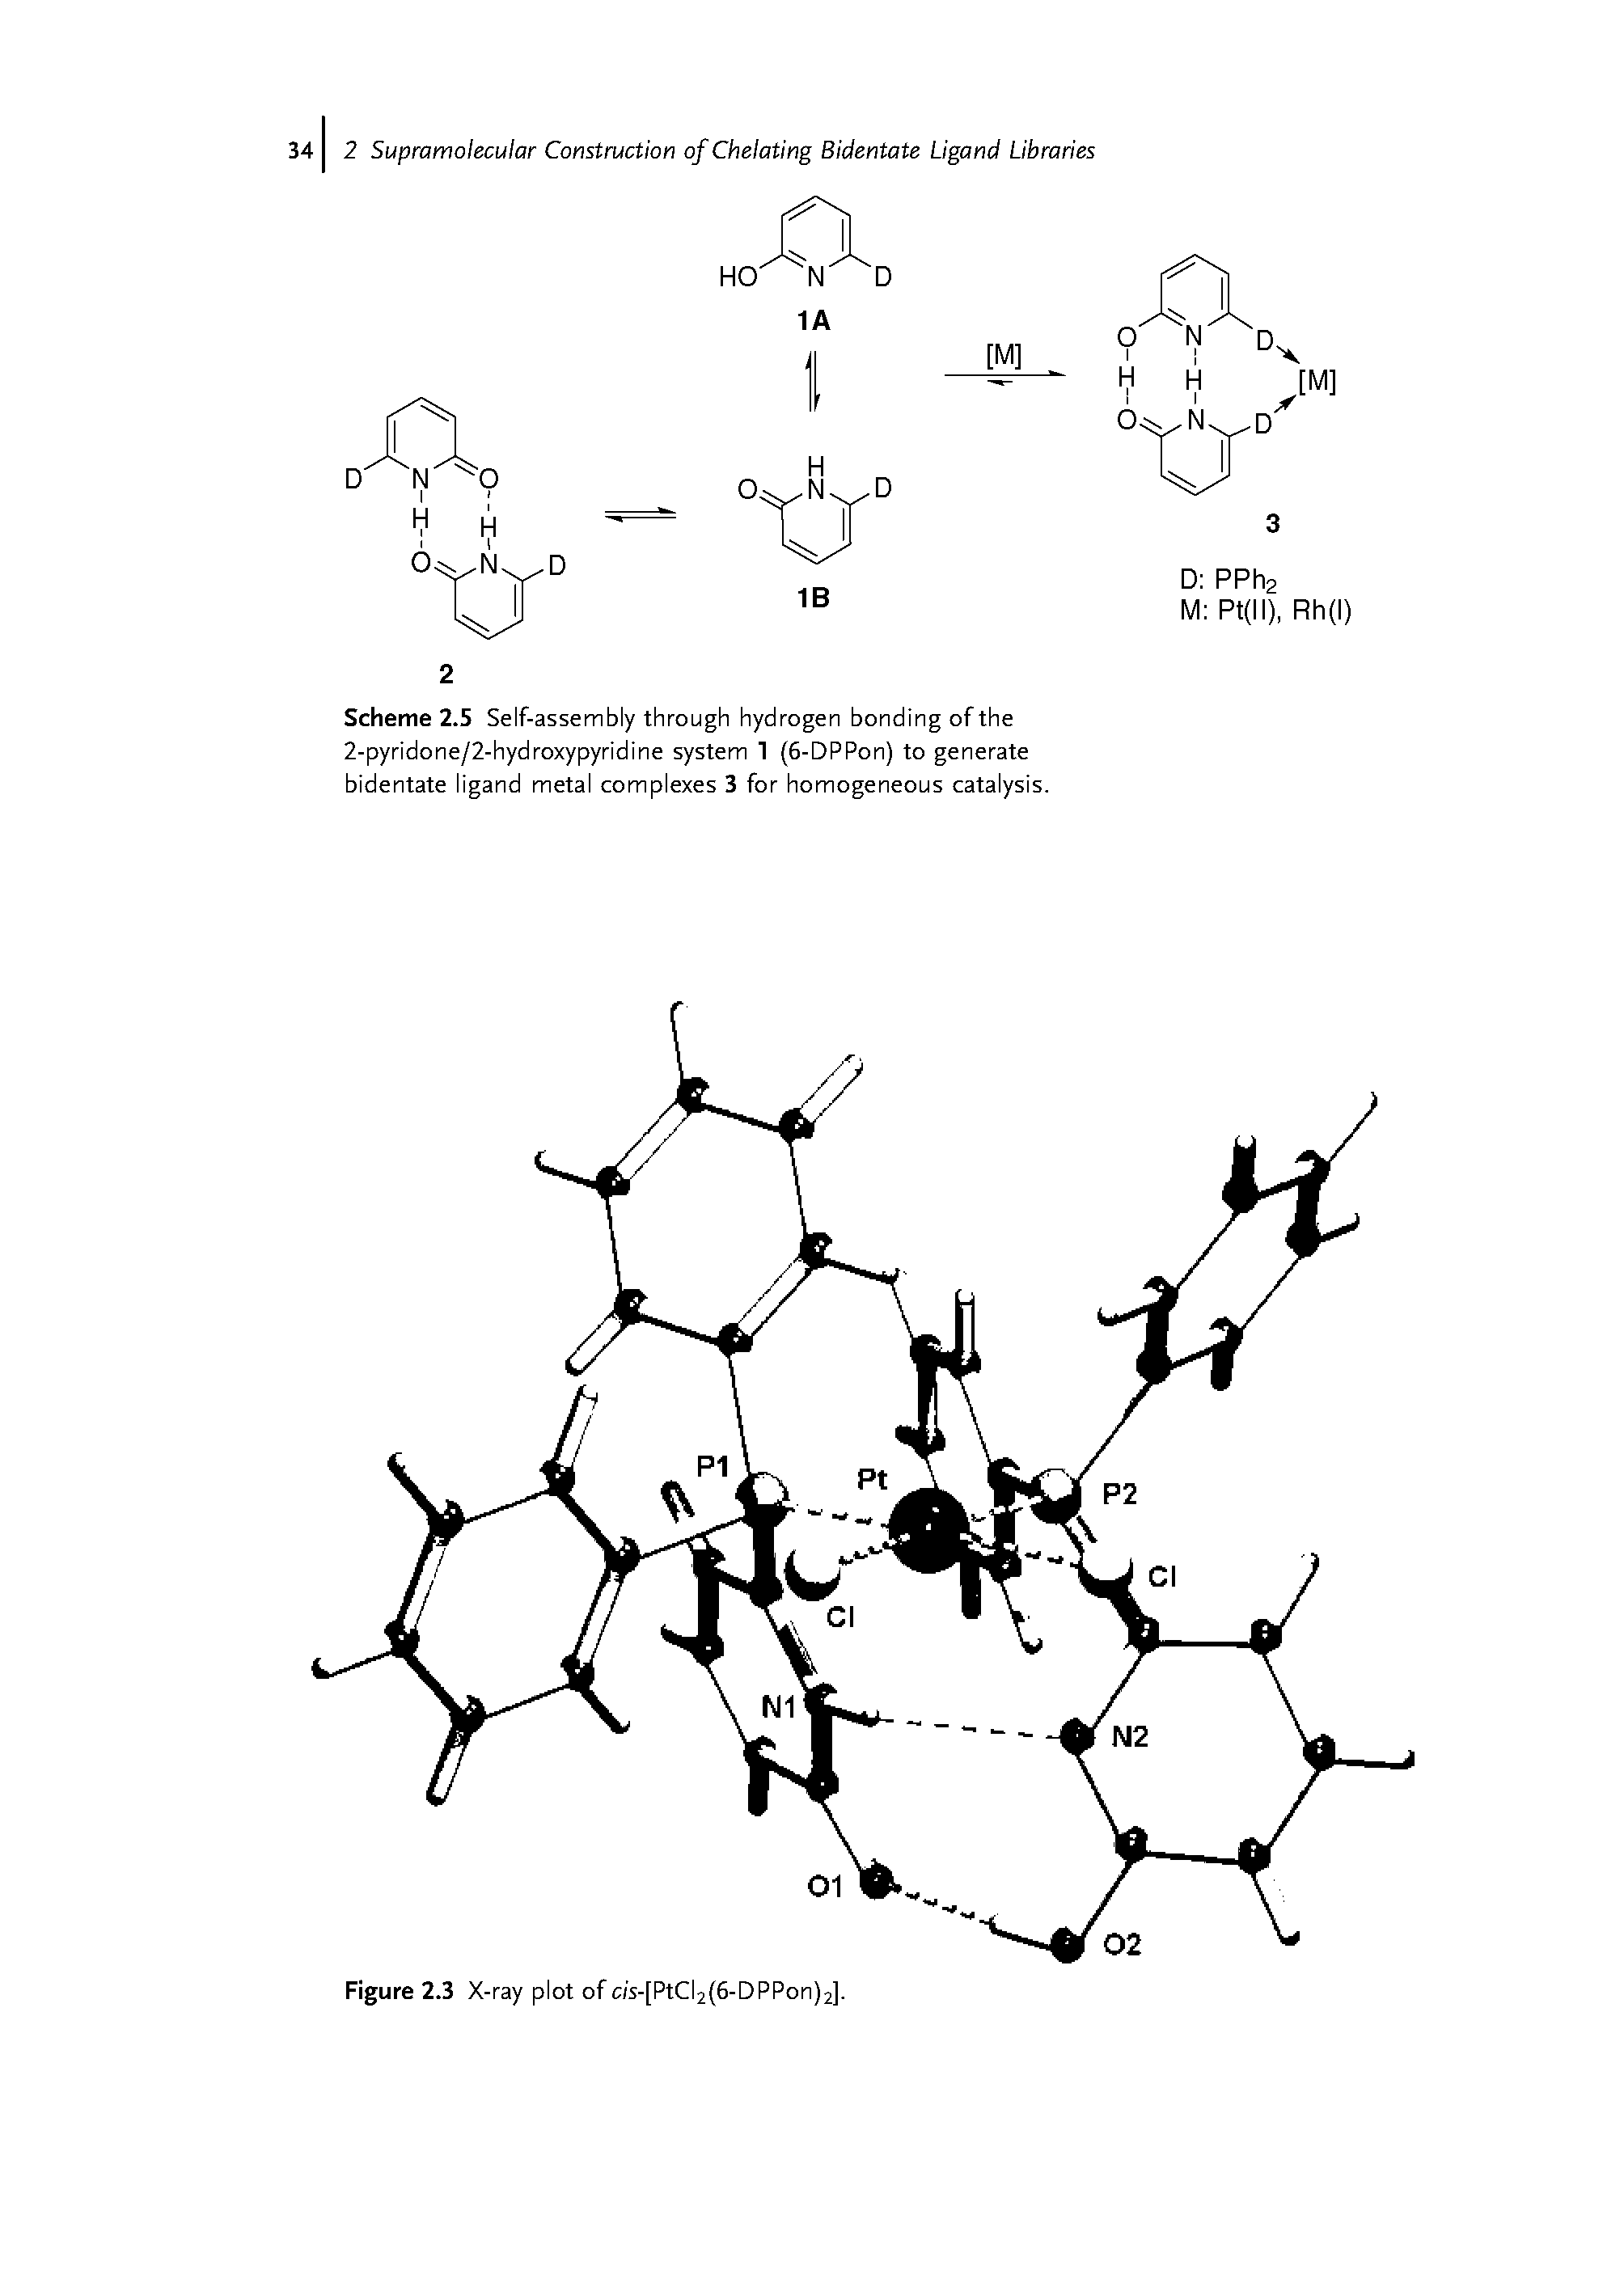 Scheme 2.5 Self-assembly through hydrogen bonding of the 2-pyridone/2-hydroxypyridine system 1 (6-DPPon) to generate bidentate ligand metal complexes 3 for homogeneous catalysis.